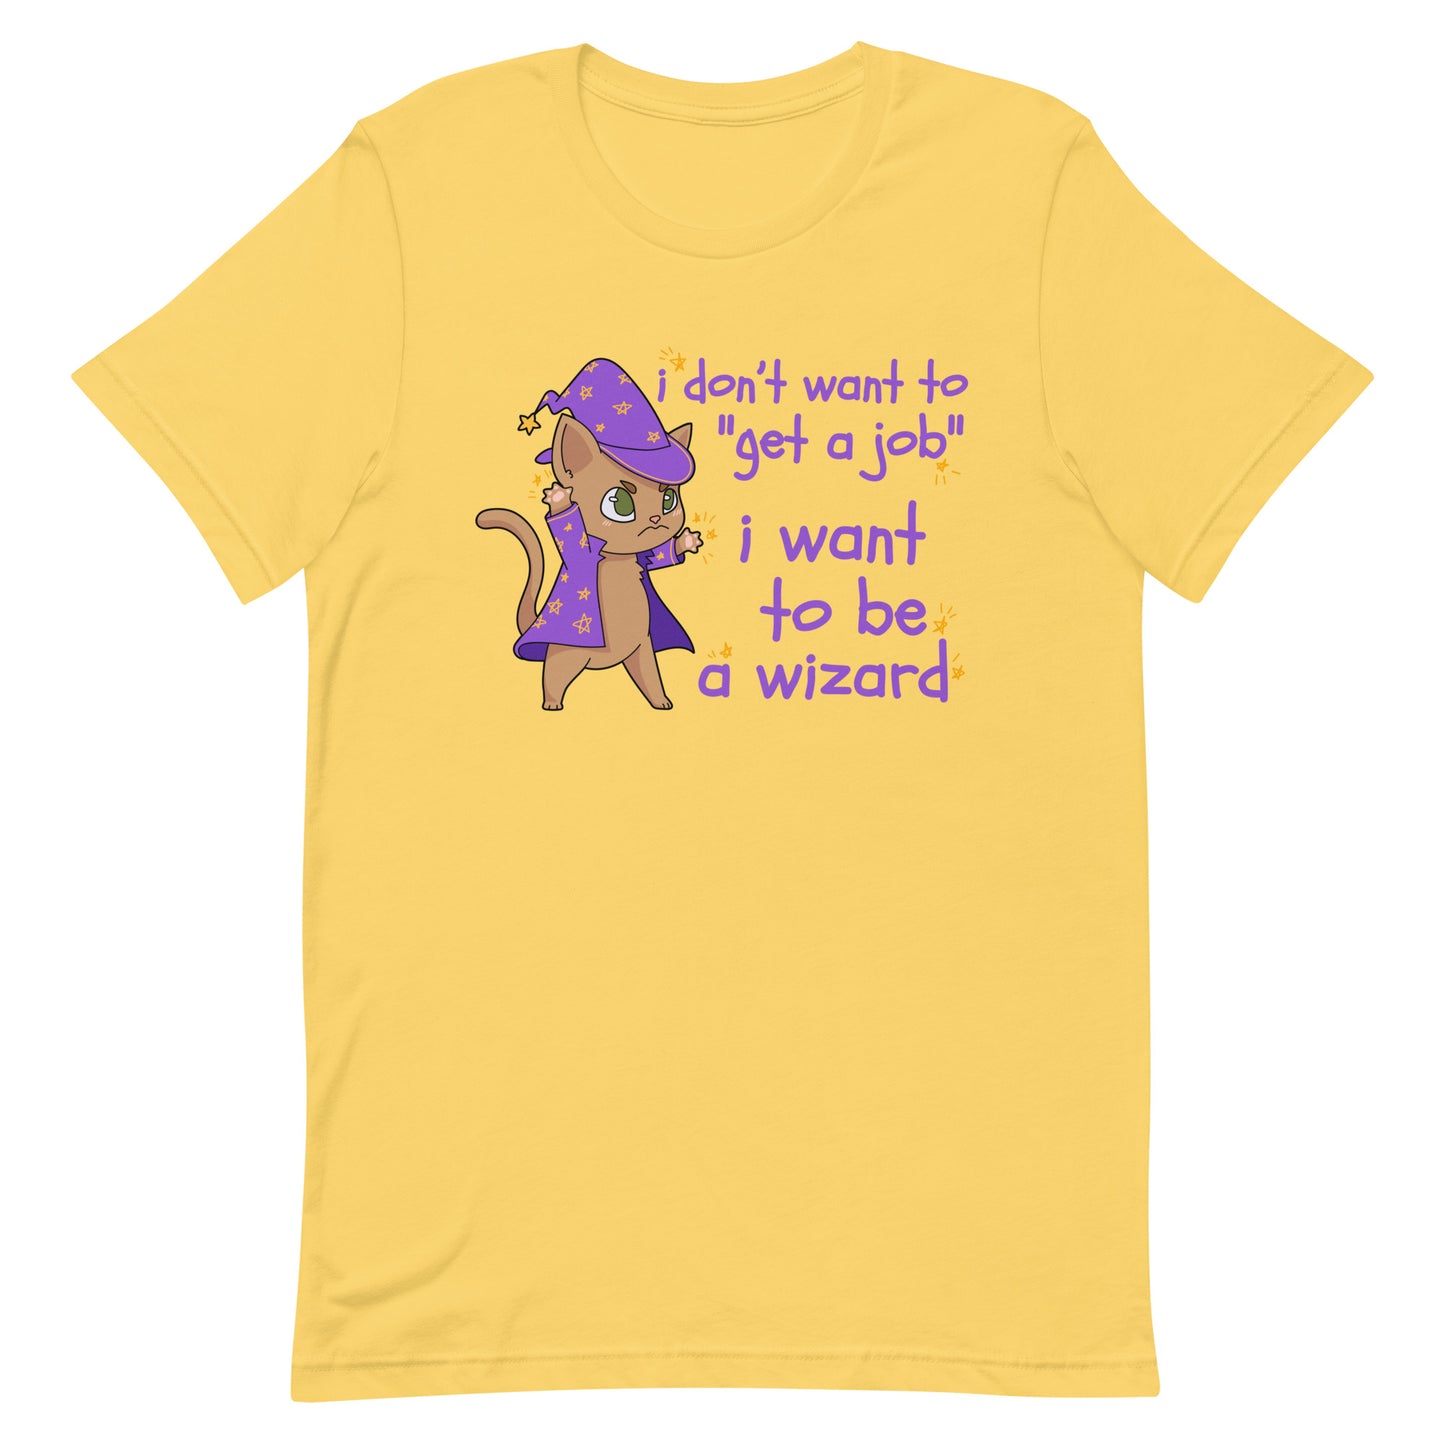 A yellow t-shirt featuring an illustration of a small brown cat wearing a wizard's hat and robes. Scribbly text next to the cat reads "i don't want to "get a job". i want to be a wizard".